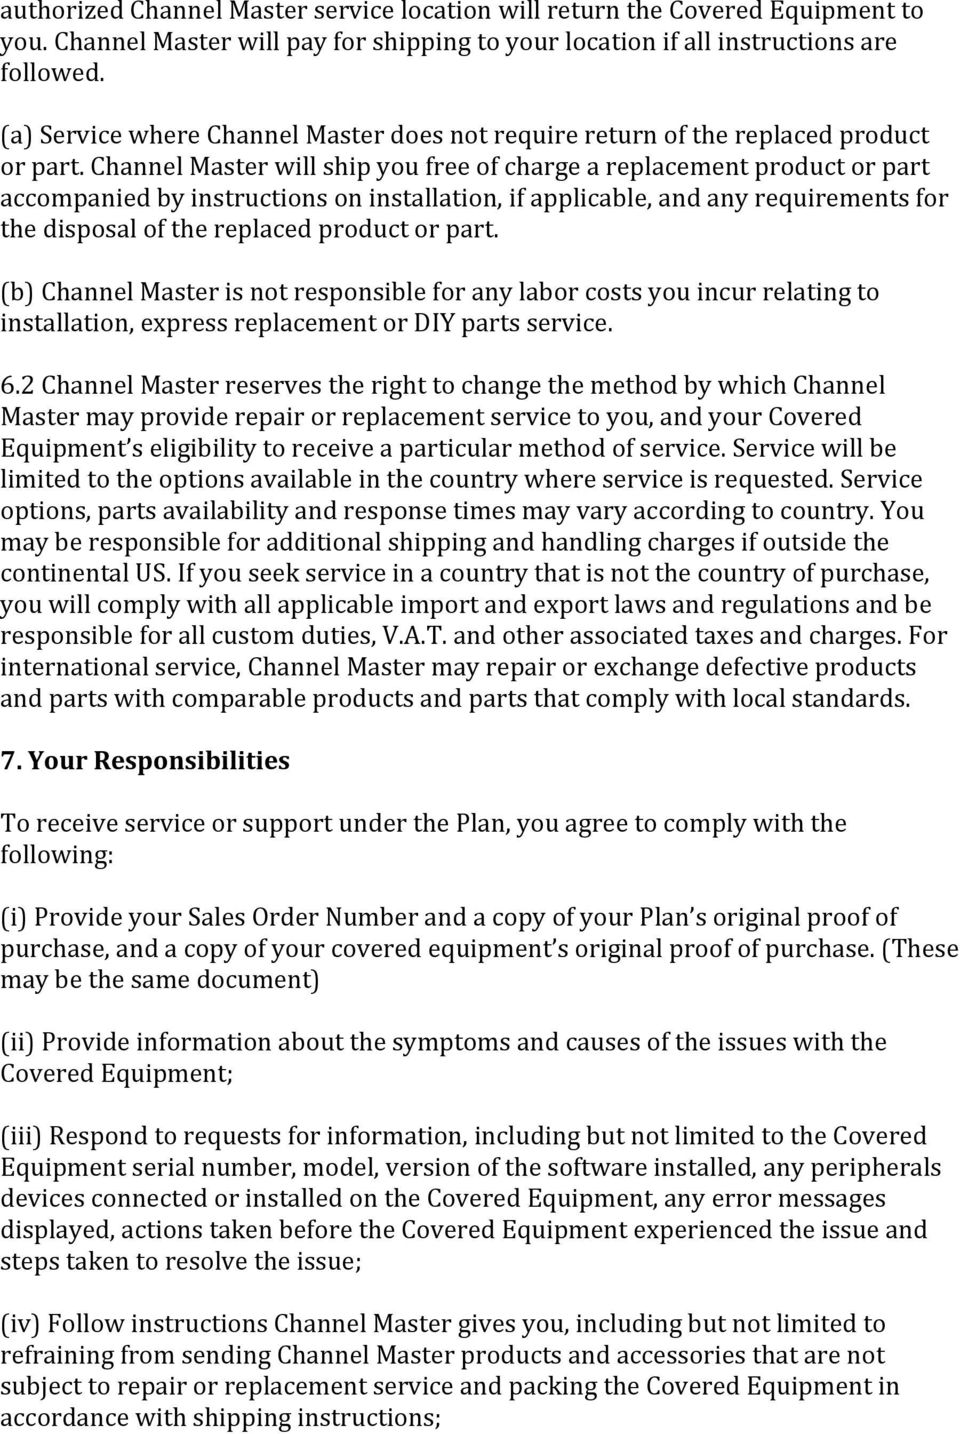 Channel Master will ship you free of charge a replacement product or part accompanied by instructions on installation, if applicable, and any requirements for the disposal of the replaced product or